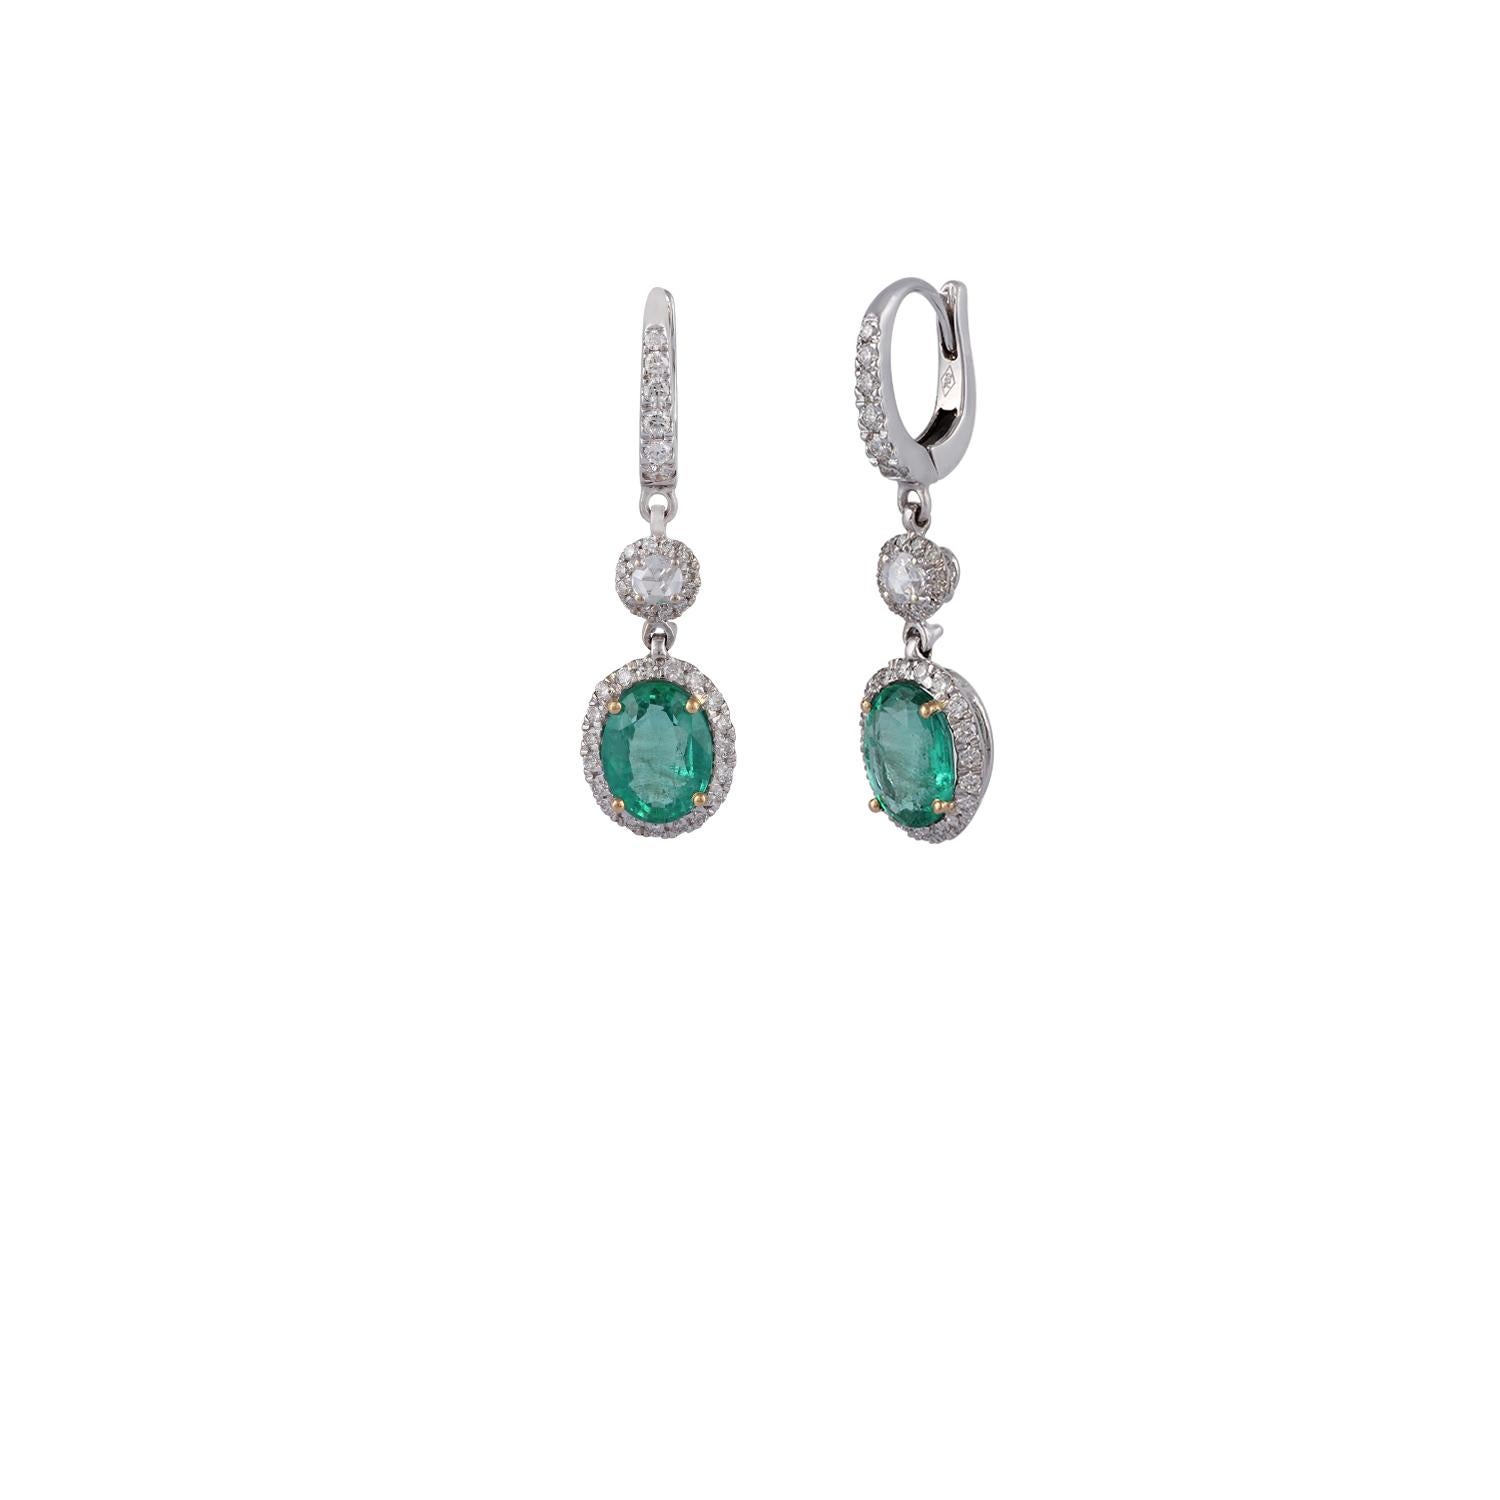 Contemporary 3.33 Carat  Zambian Emerald and Diamond Earrings Studded in 18 Karat White Gold For Sale